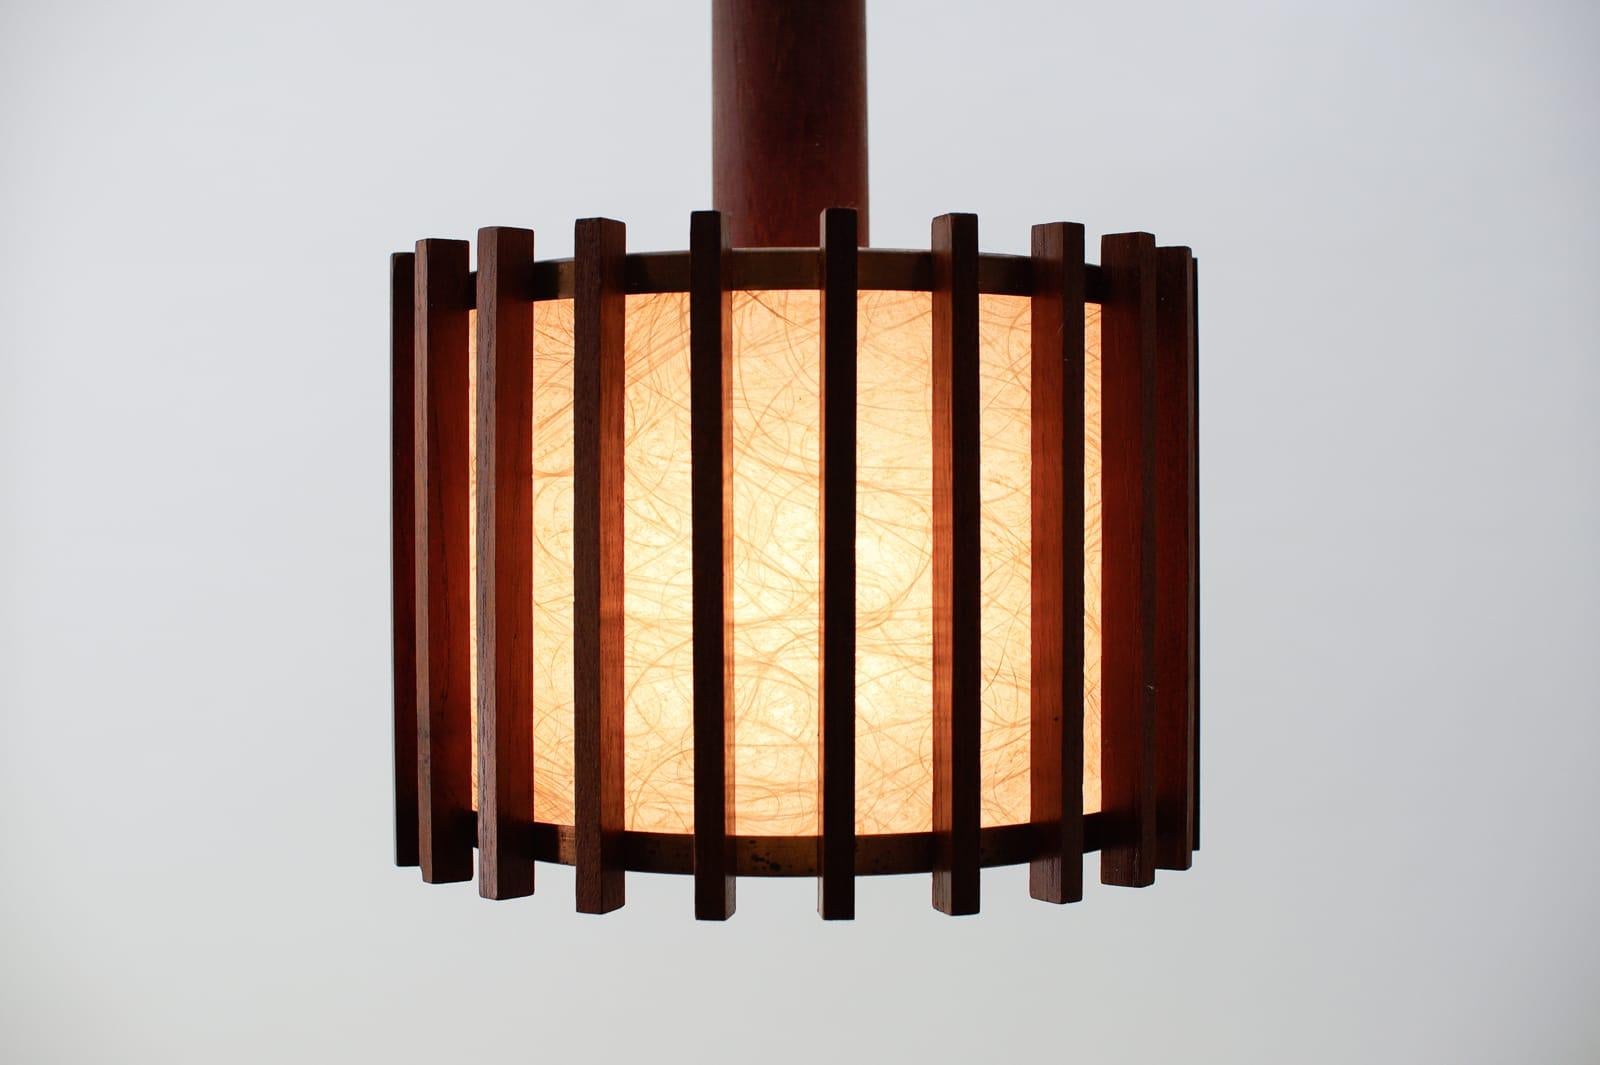 Pair of Scandinavian Mid-Century Modern Ceiling Lamps in Teak Wood and Copper For Sale 3